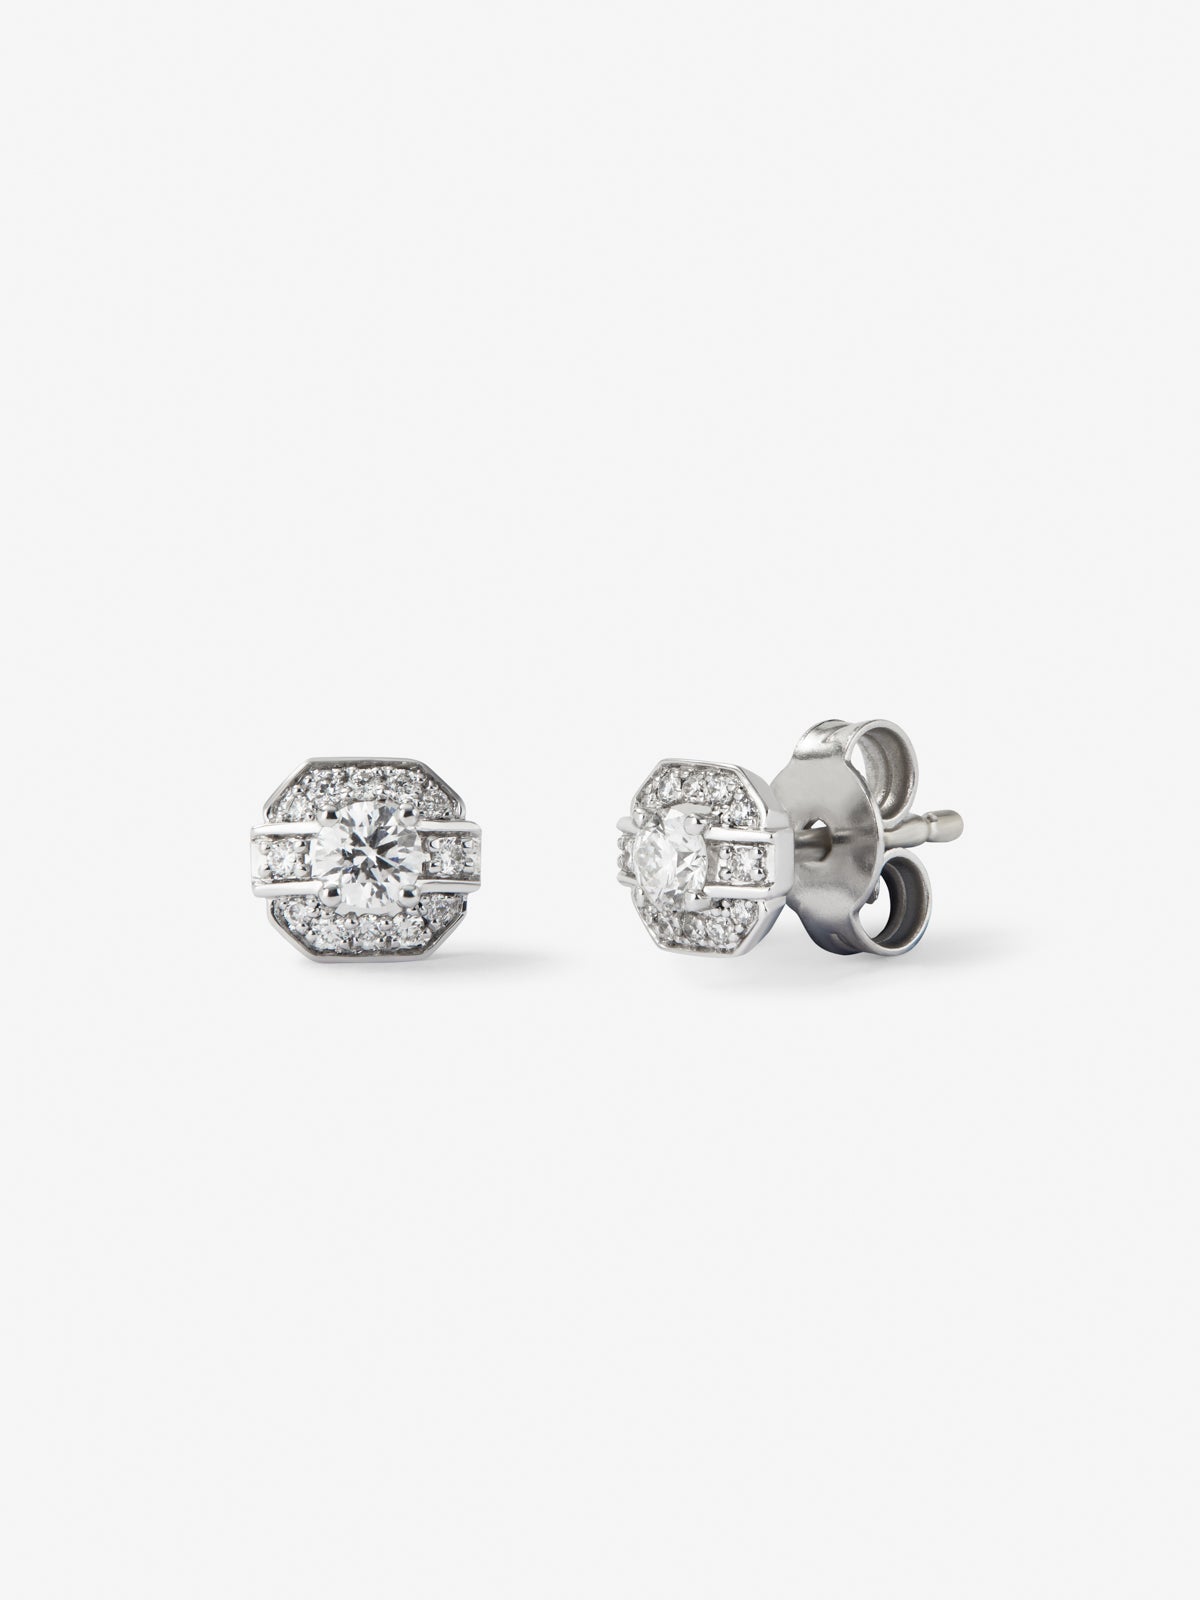 18K white gold earrings with 2 central brilliant-cut diamonds with a total of 0.2 cts and a border of 24 brilliant-cut diamonds with a total of 0.1 cts